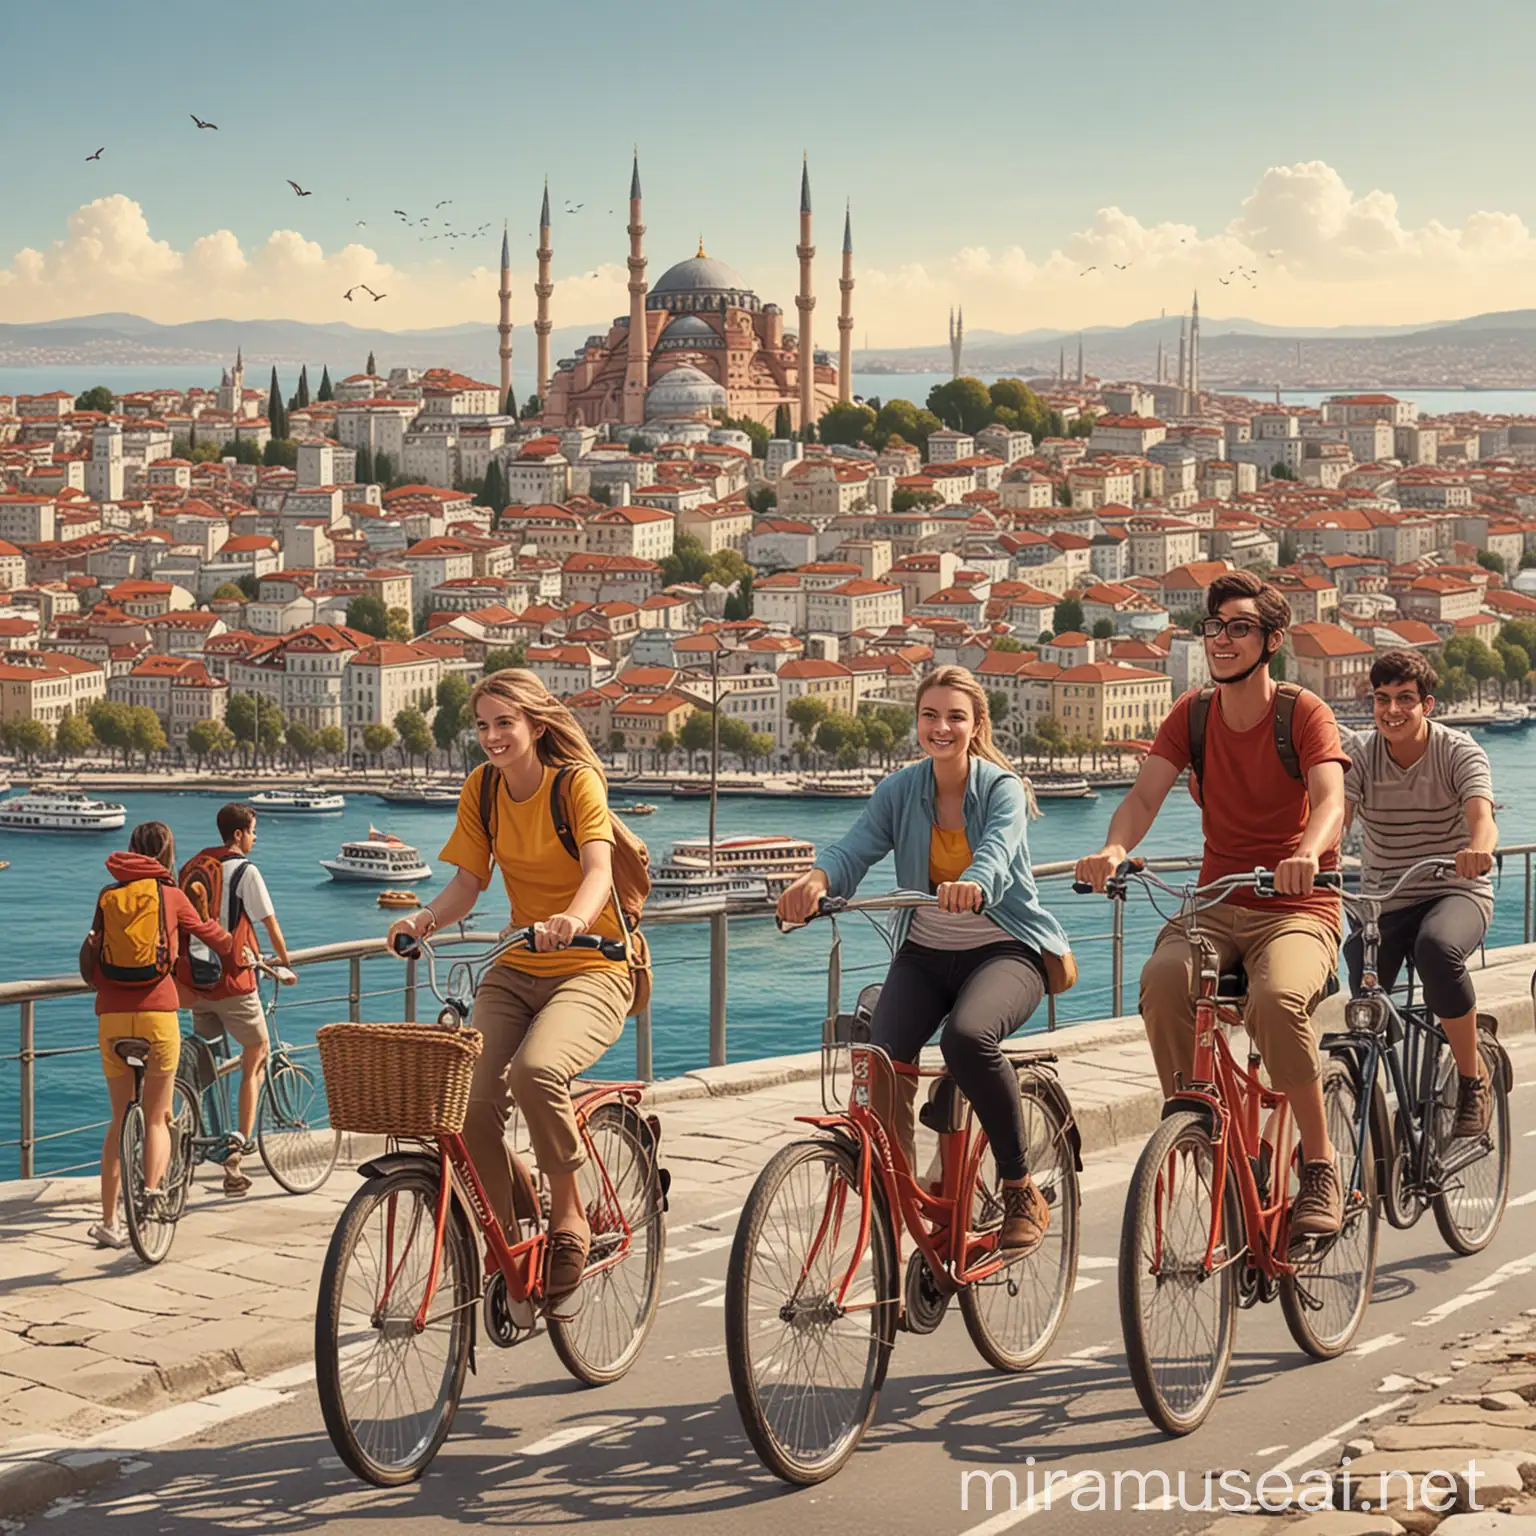 students on bicycle tour themed istanbul distant view ıllustration